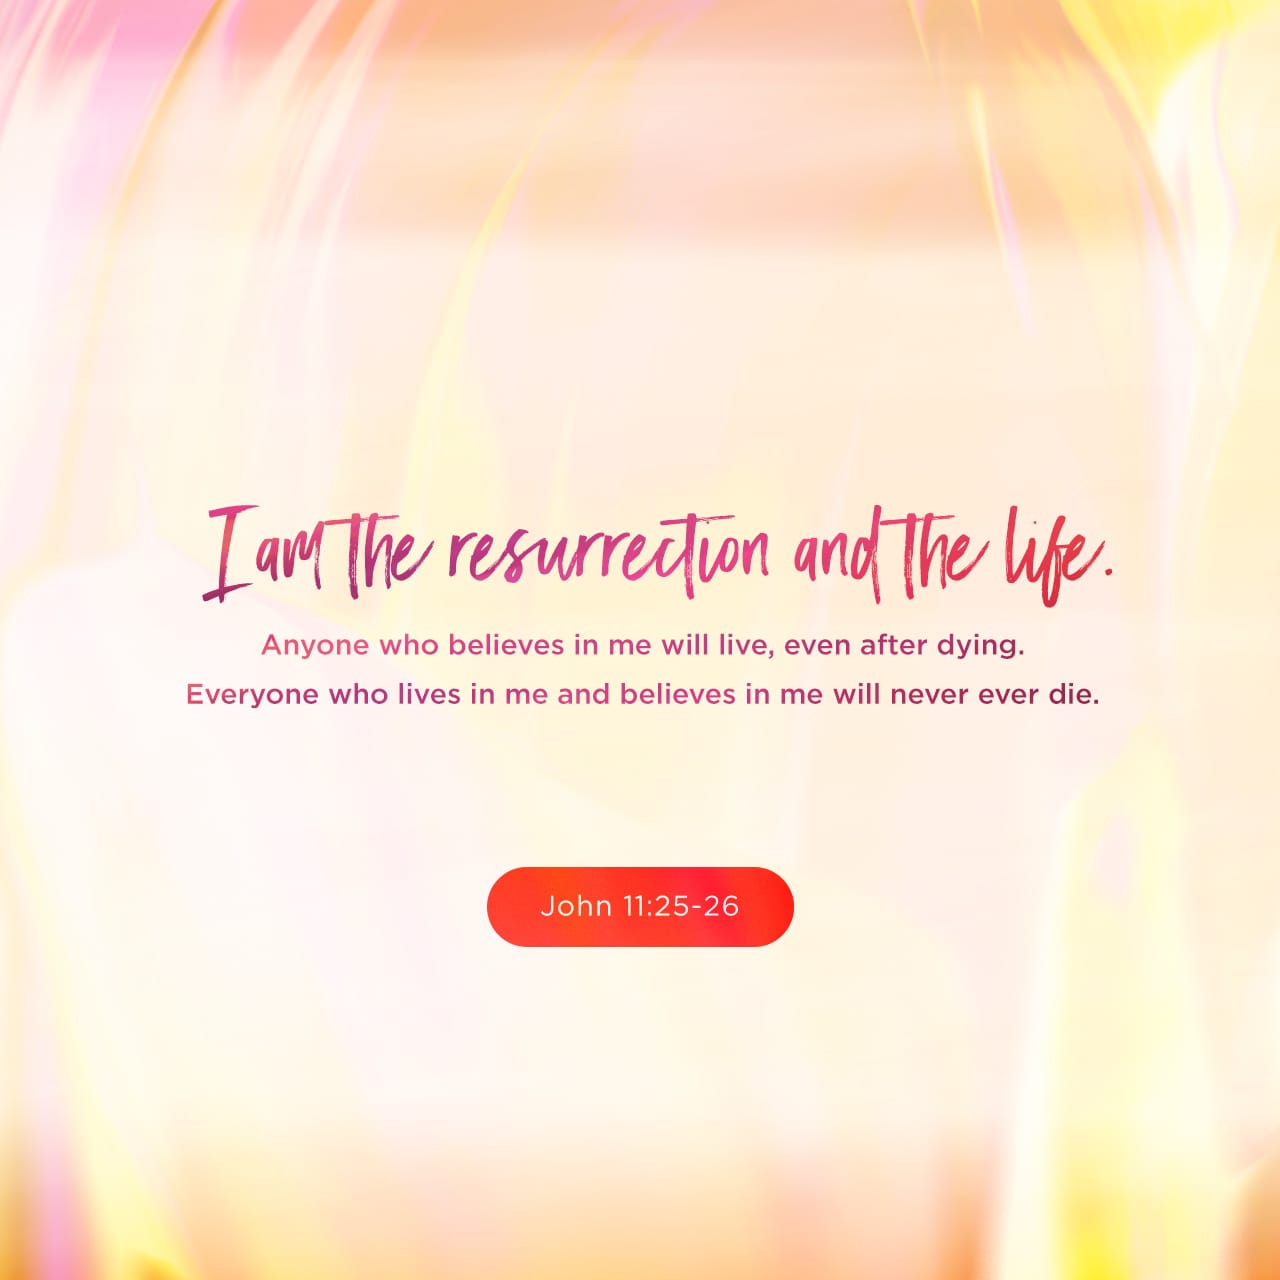 John 11:25-26 Jesus said to her, “I am the resurrection and the life. The  one who believes in me will live, even though they die; and whoever lives  by believing in me